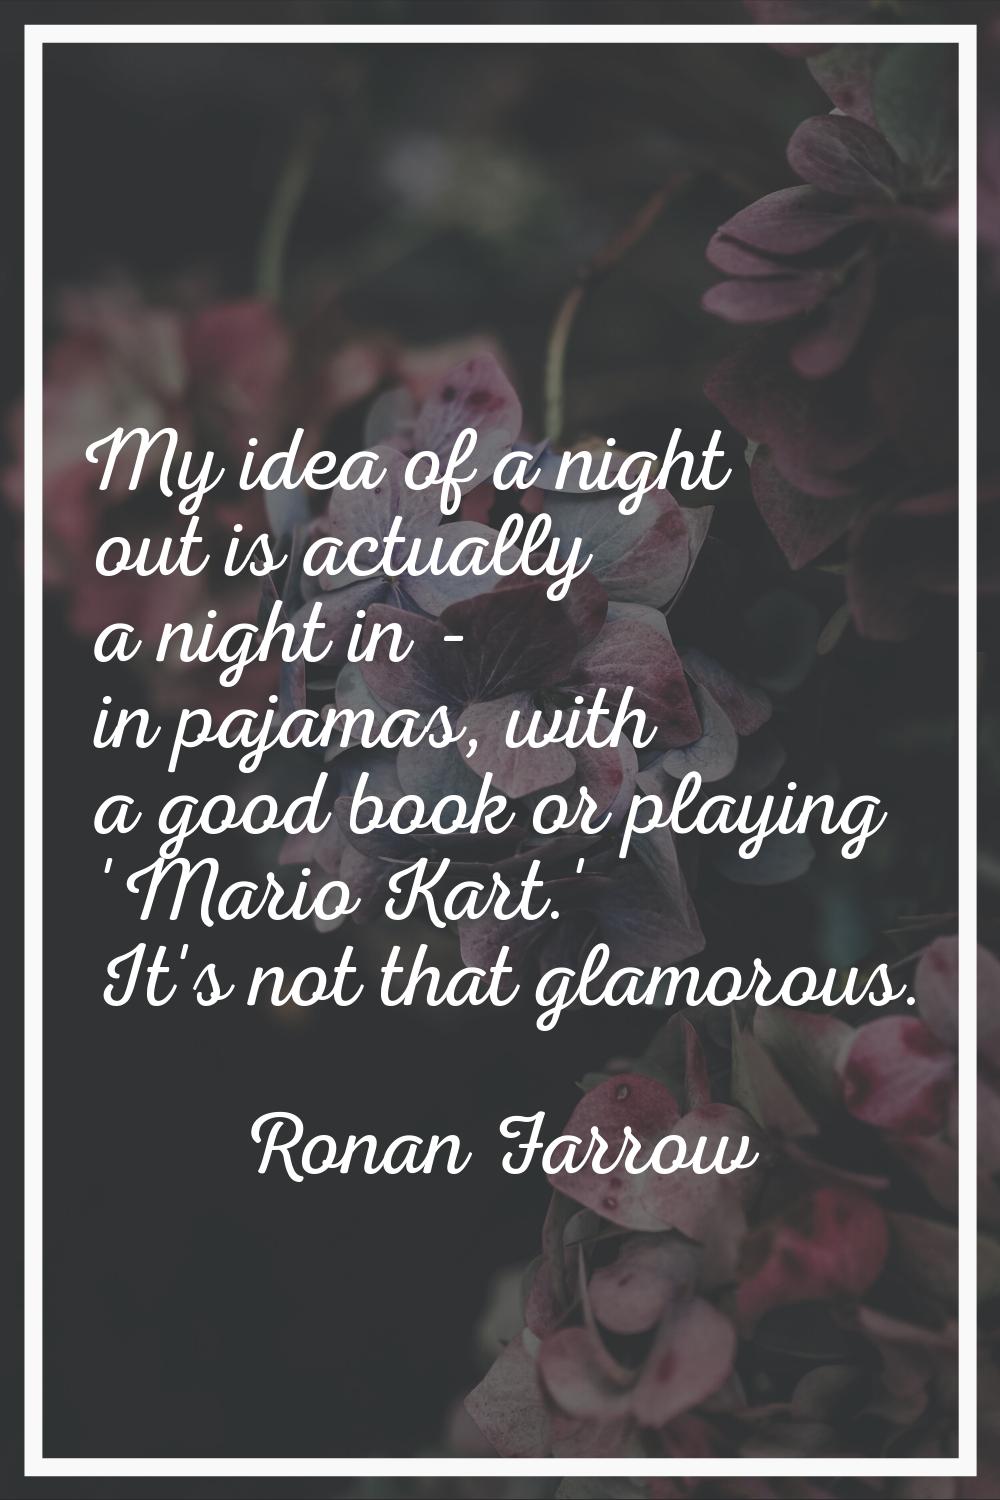 My idea of a night out is actually a night in - in pajamas, with a good book or playing 'Mario Kart